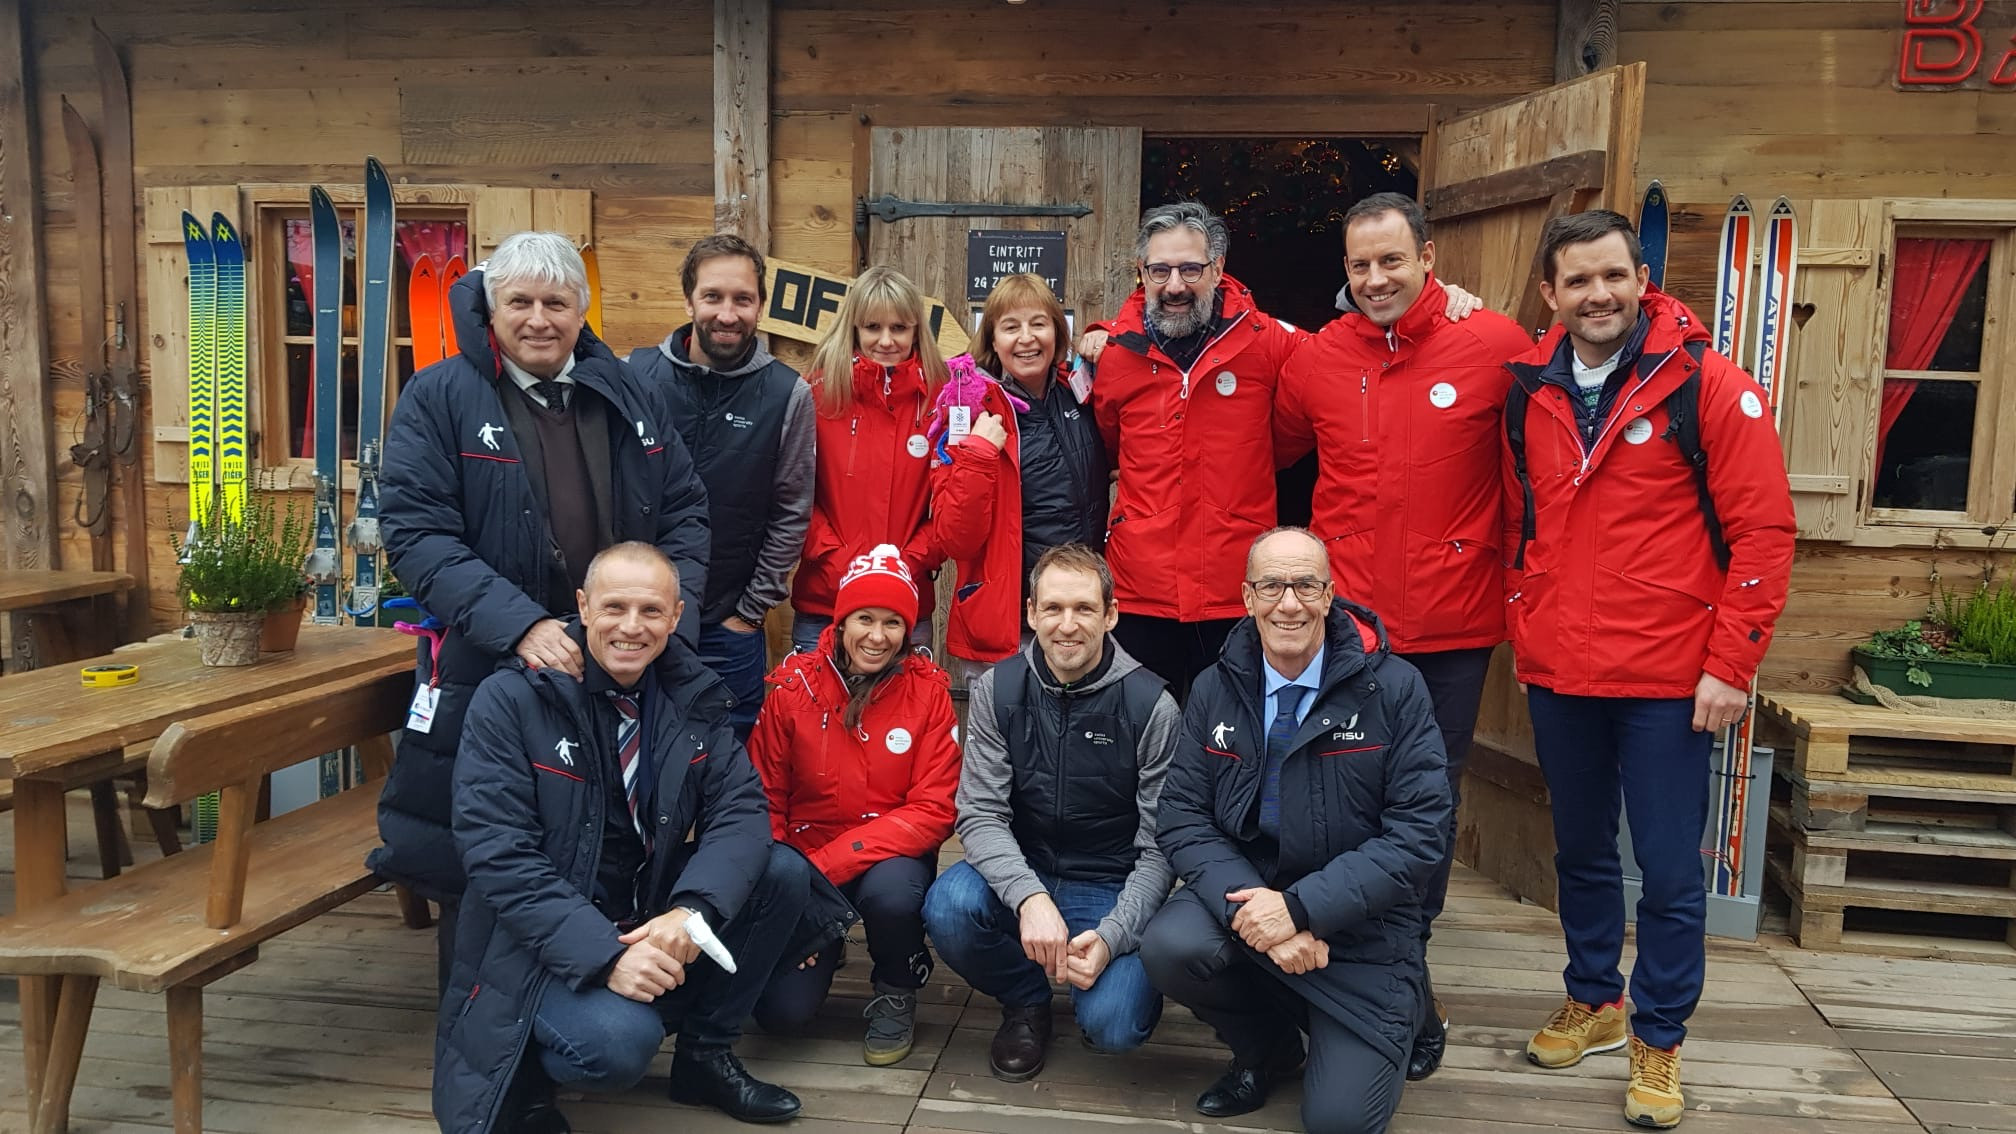 FISU paid a visit to the Lucerne 2021 Organising Committee following the Games' cancellation ©FISU